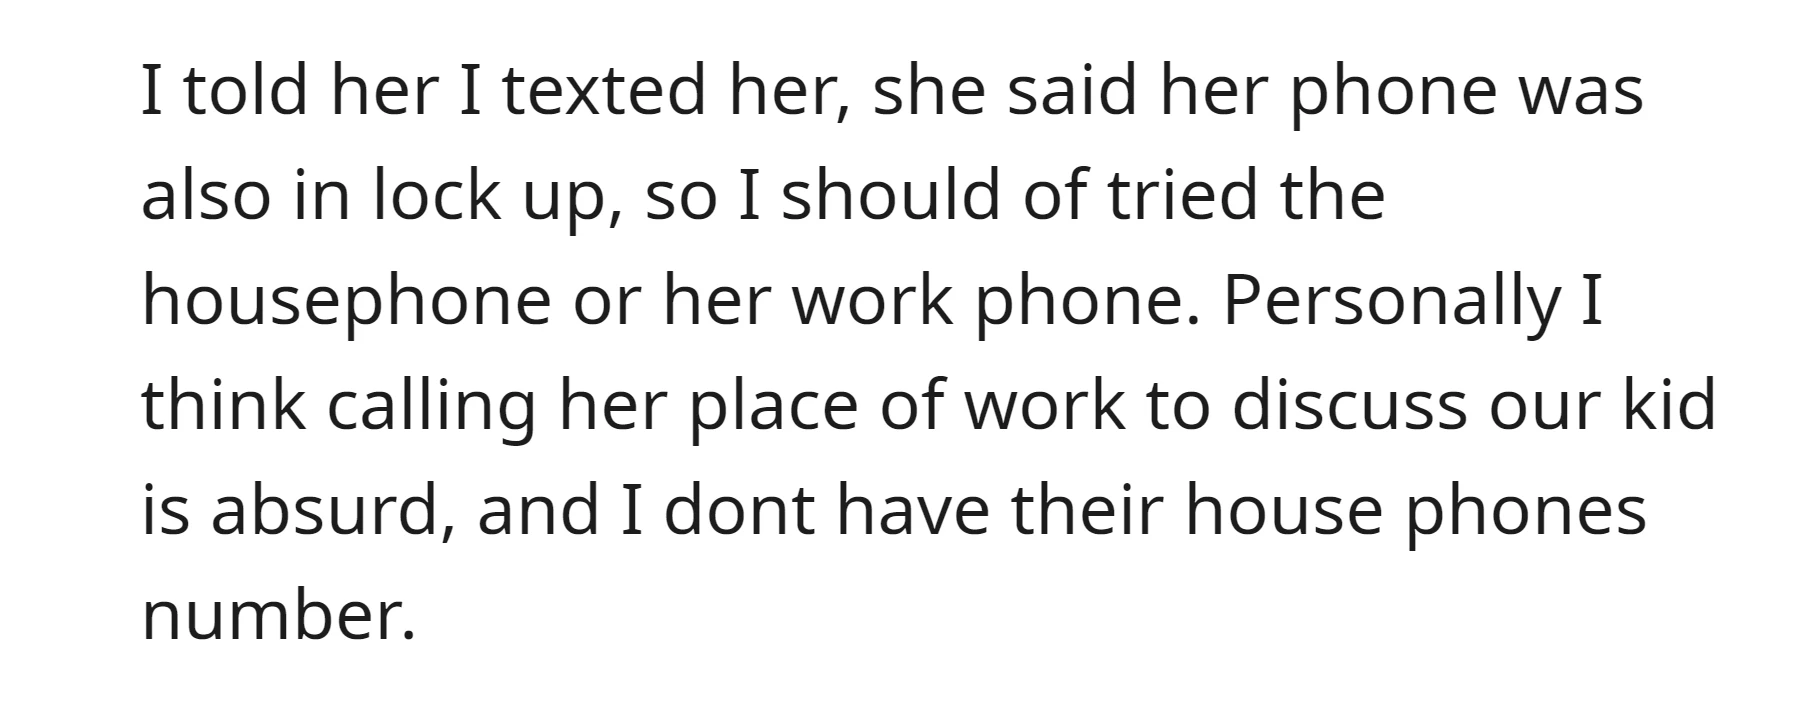 His ex suggested using the house or work phone, but OP found it impractical